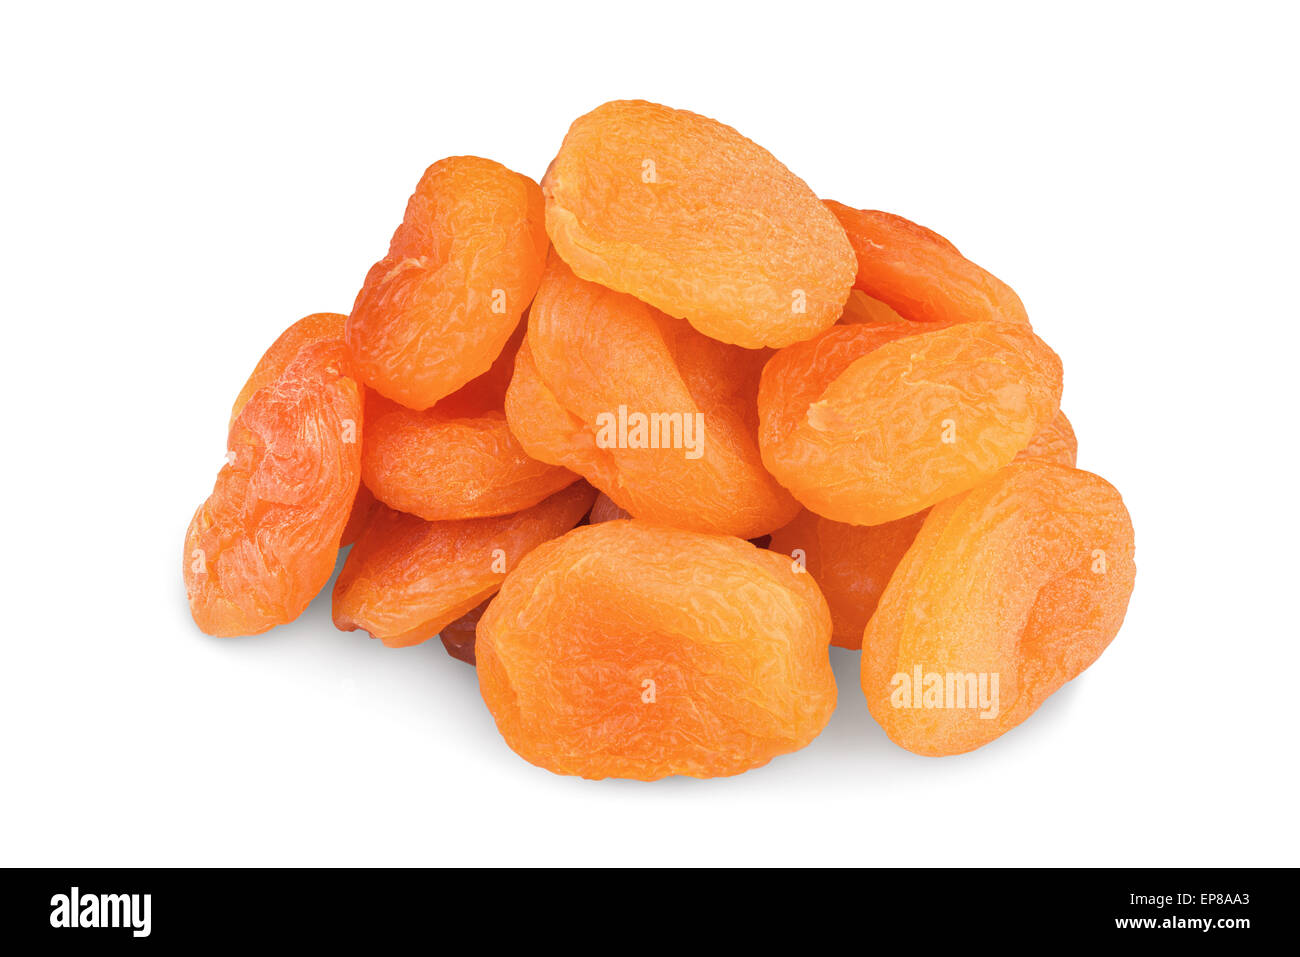 Dried pitted apricots  isolated on a white background Stock Photo